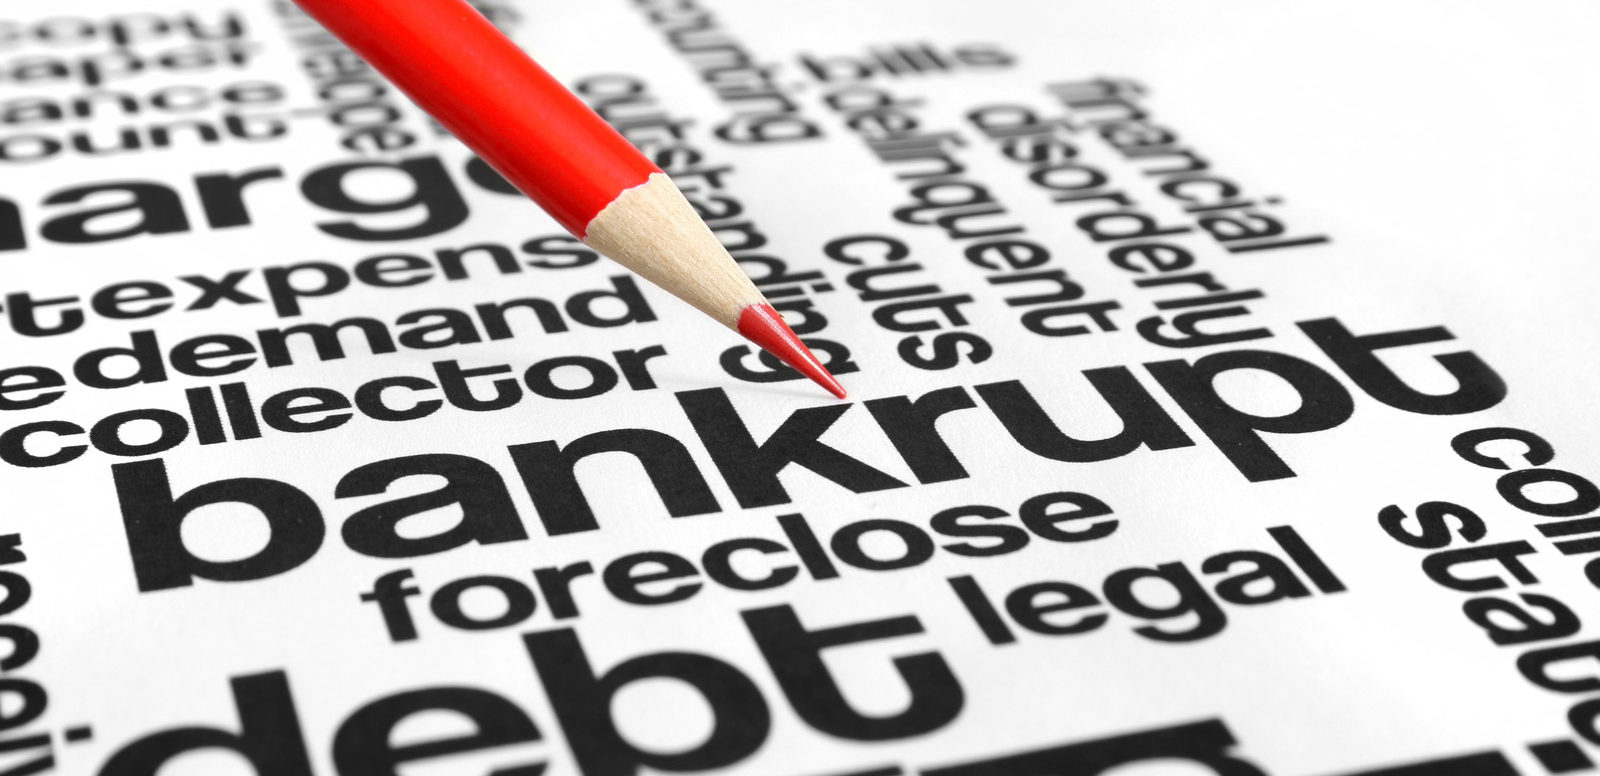 Divorce and bankruptcy affect each other, so plan carefully.